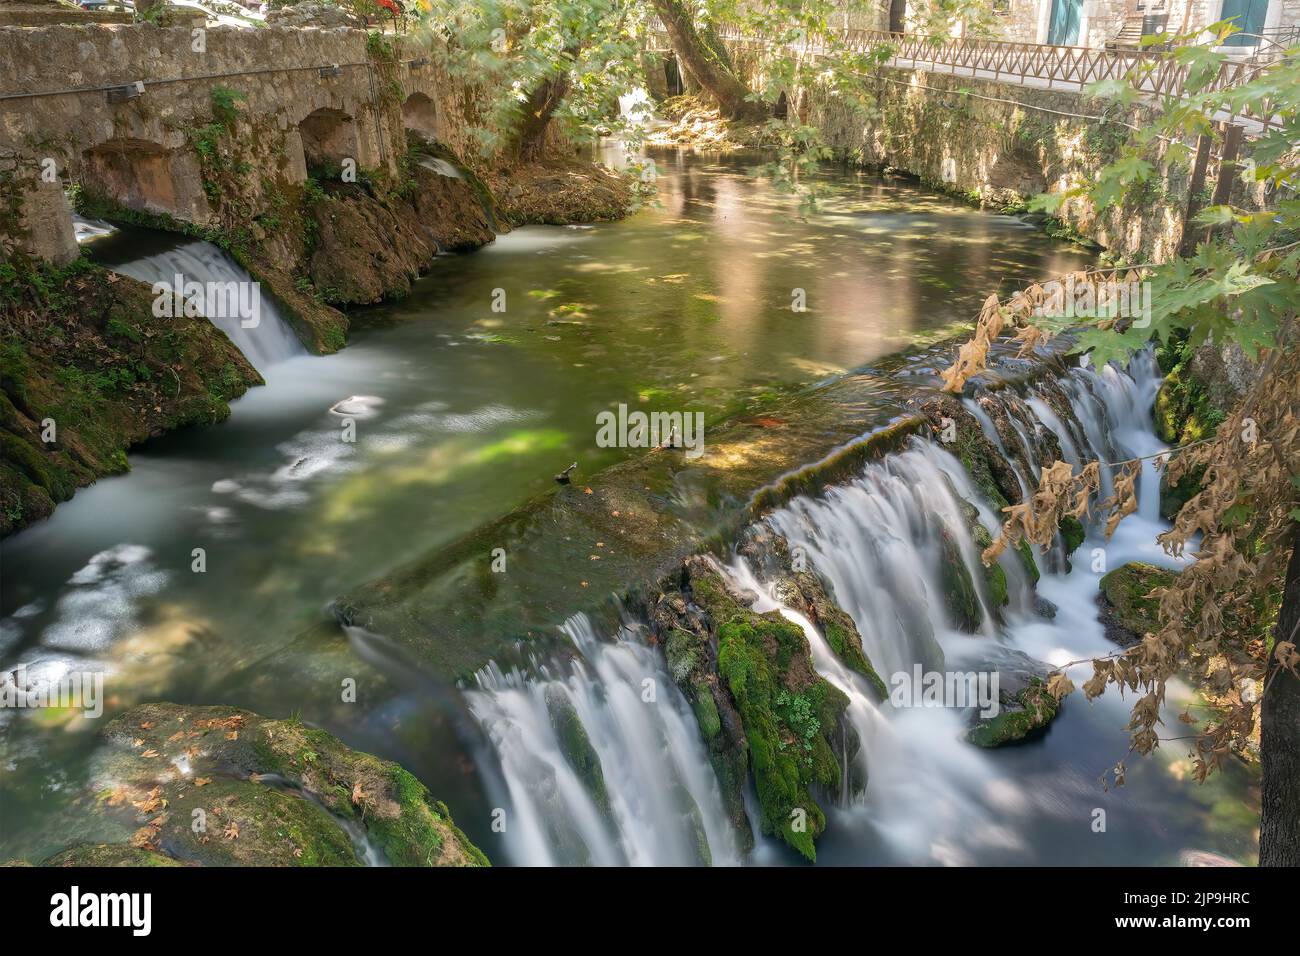 Waterfalls at Krya in Livadeia city in Greece. A famous touristic destination. Stock Photo